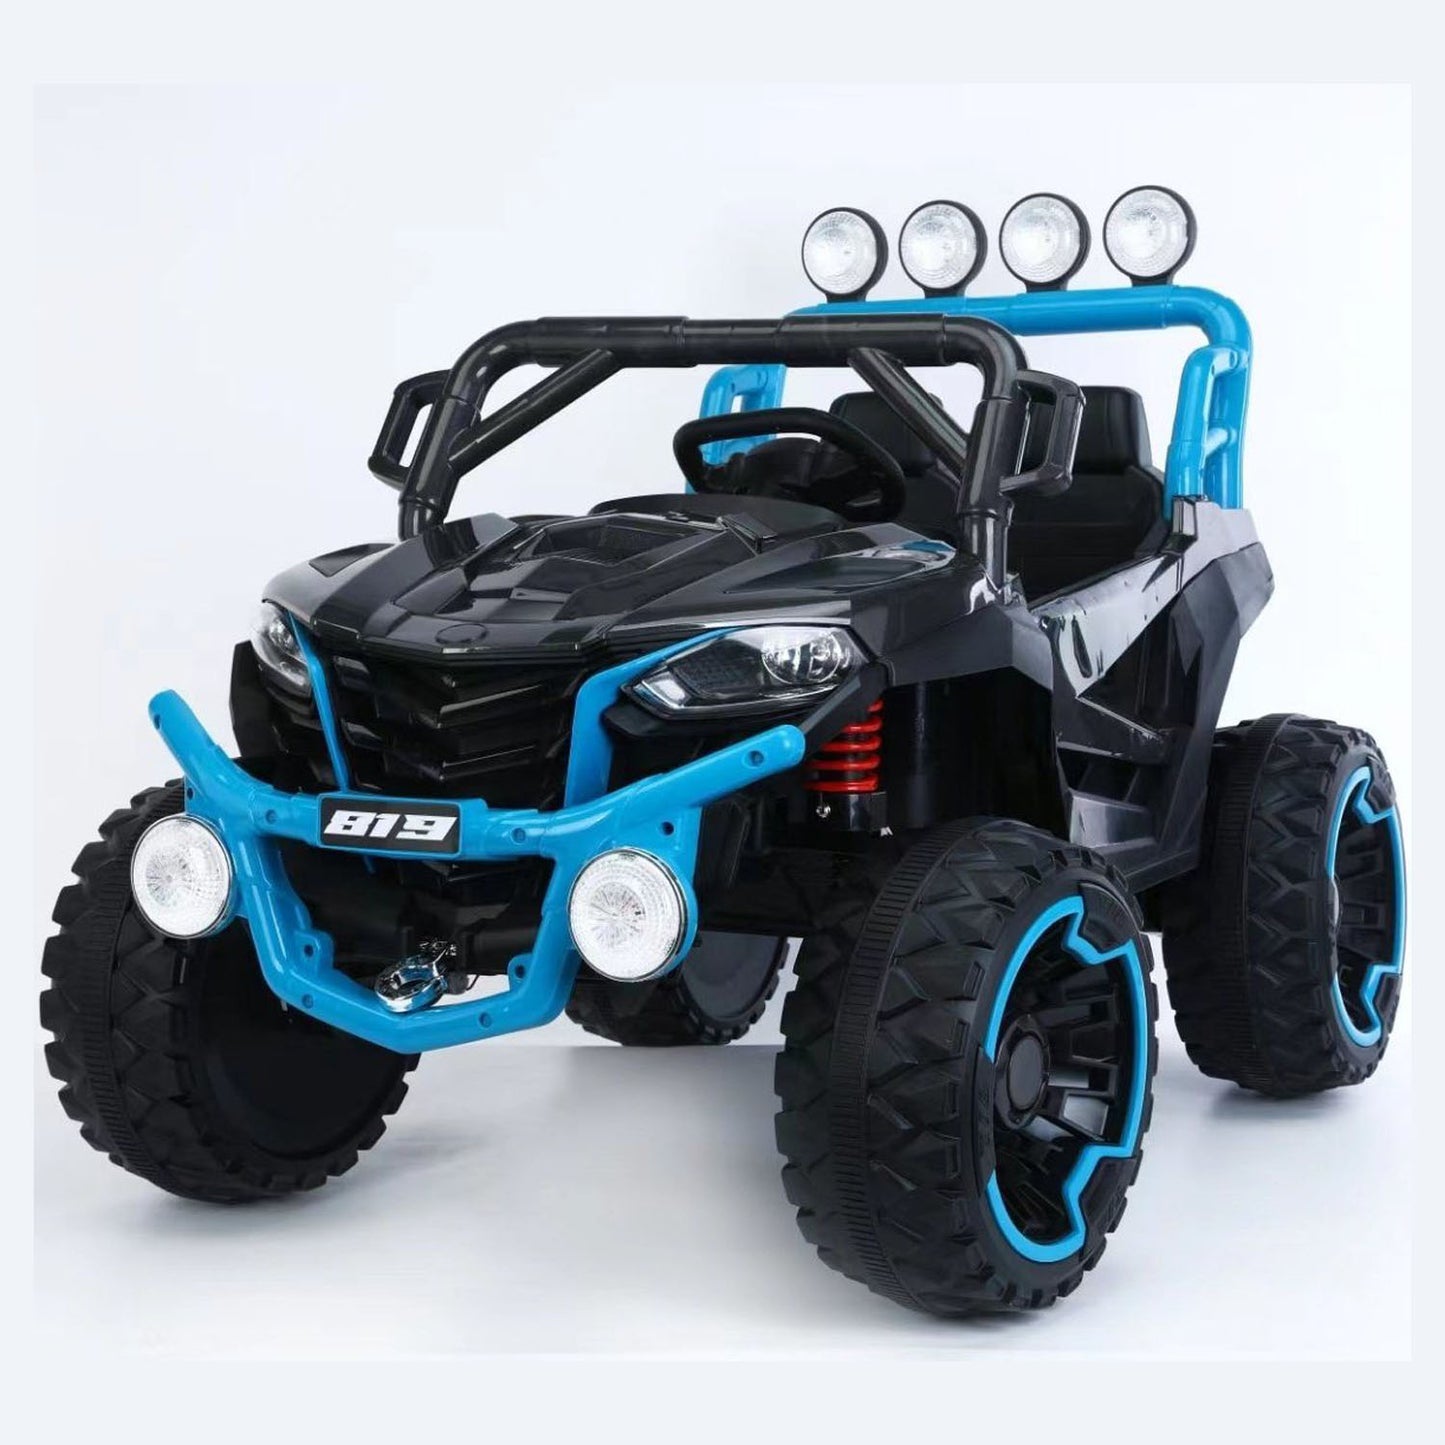 Fliptoy™ | 12V Ride on utv  | Baby driving Car toy | for girl’s & boy’s age group 3 -6 years old Model No. 819